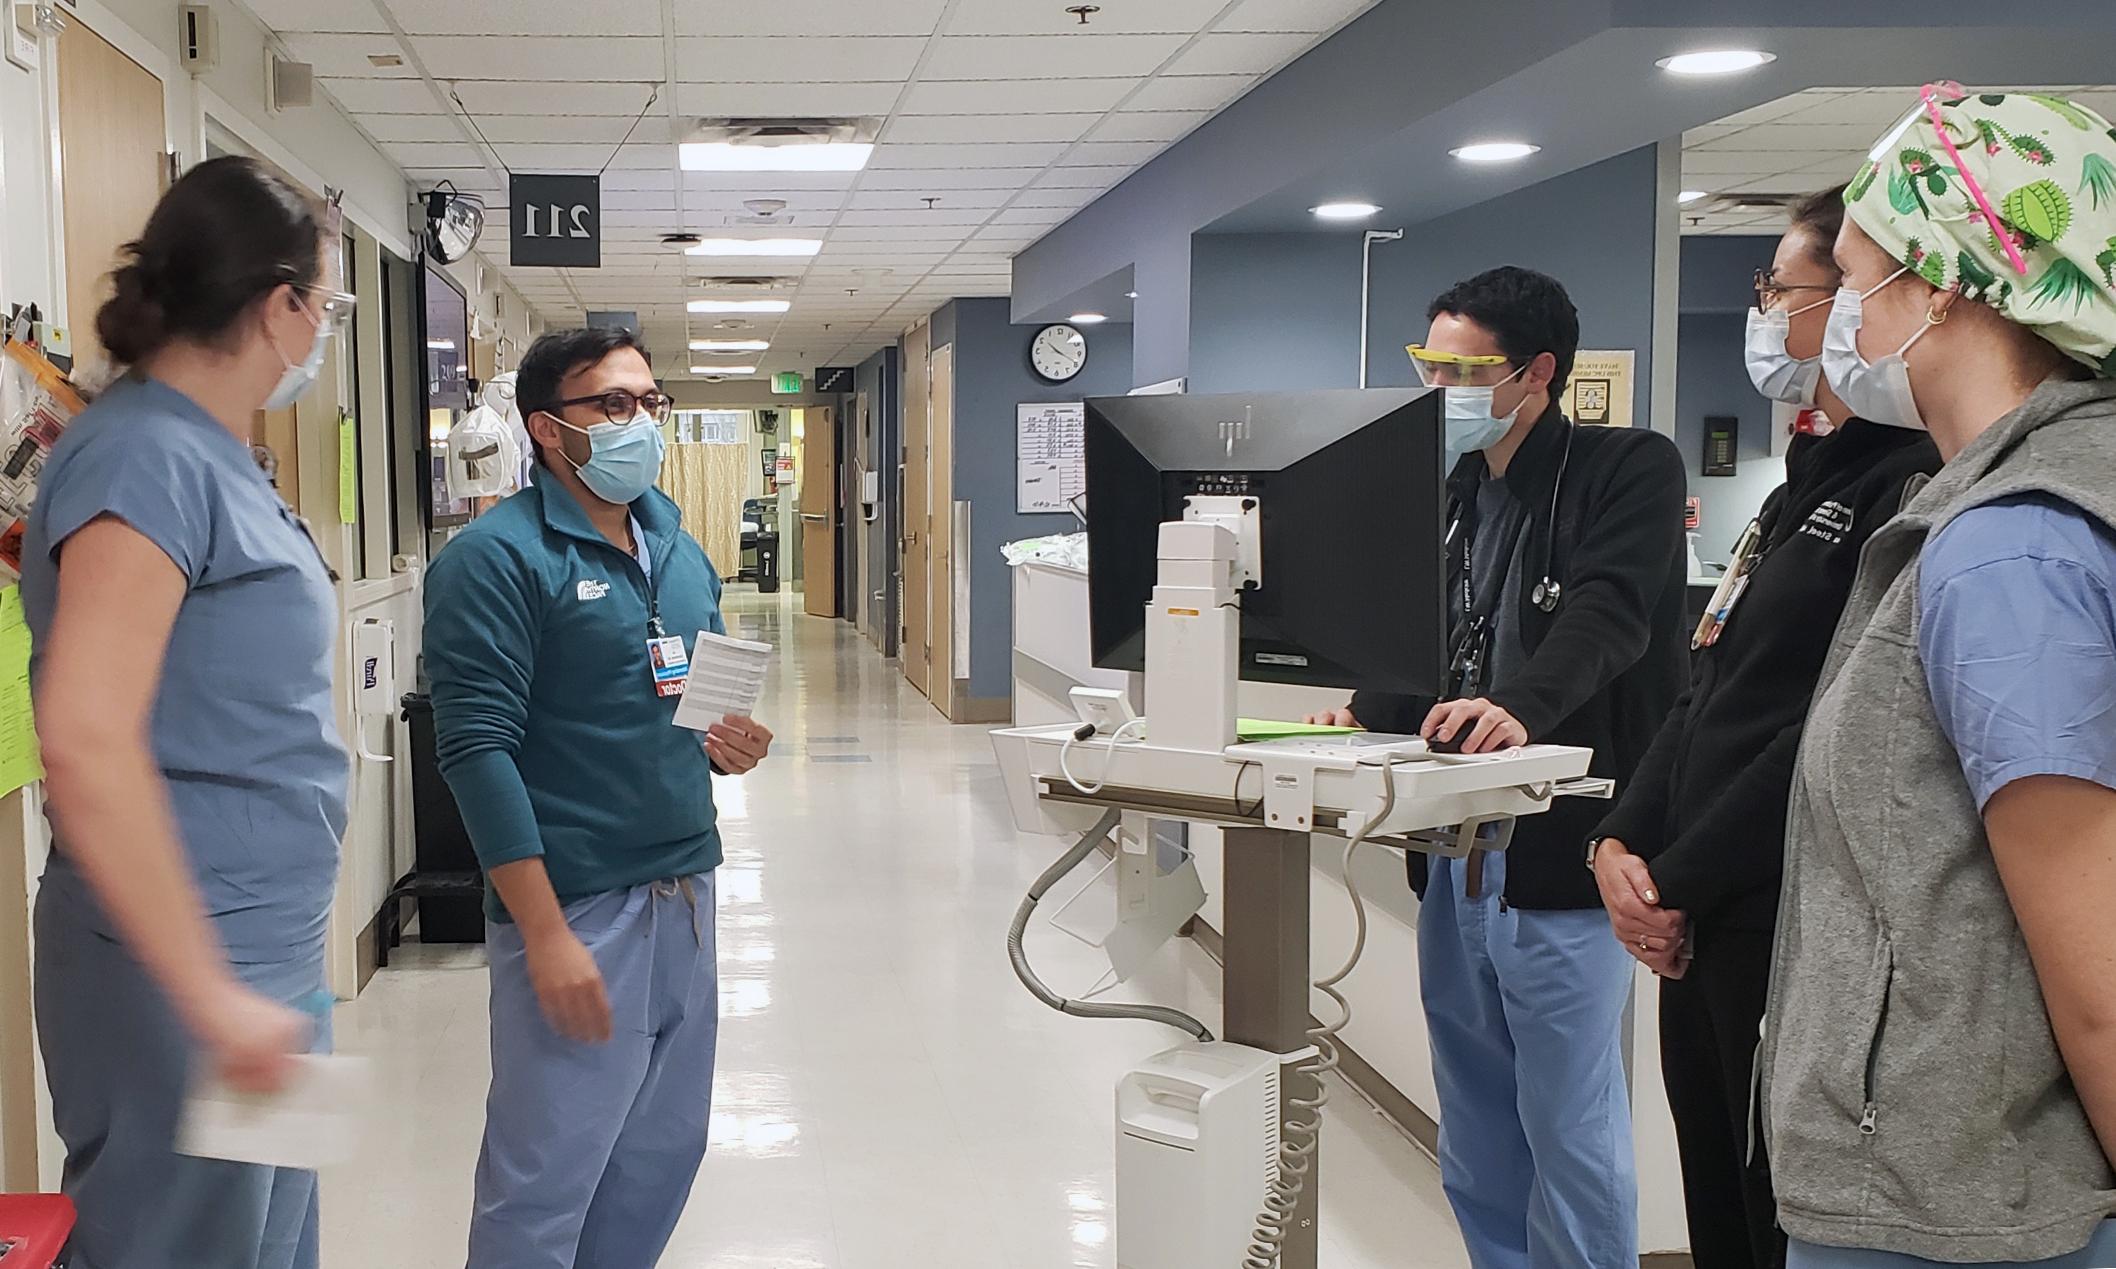 An image of Jay Brahmbhatt, M.D. talking to residents in a hospital setting